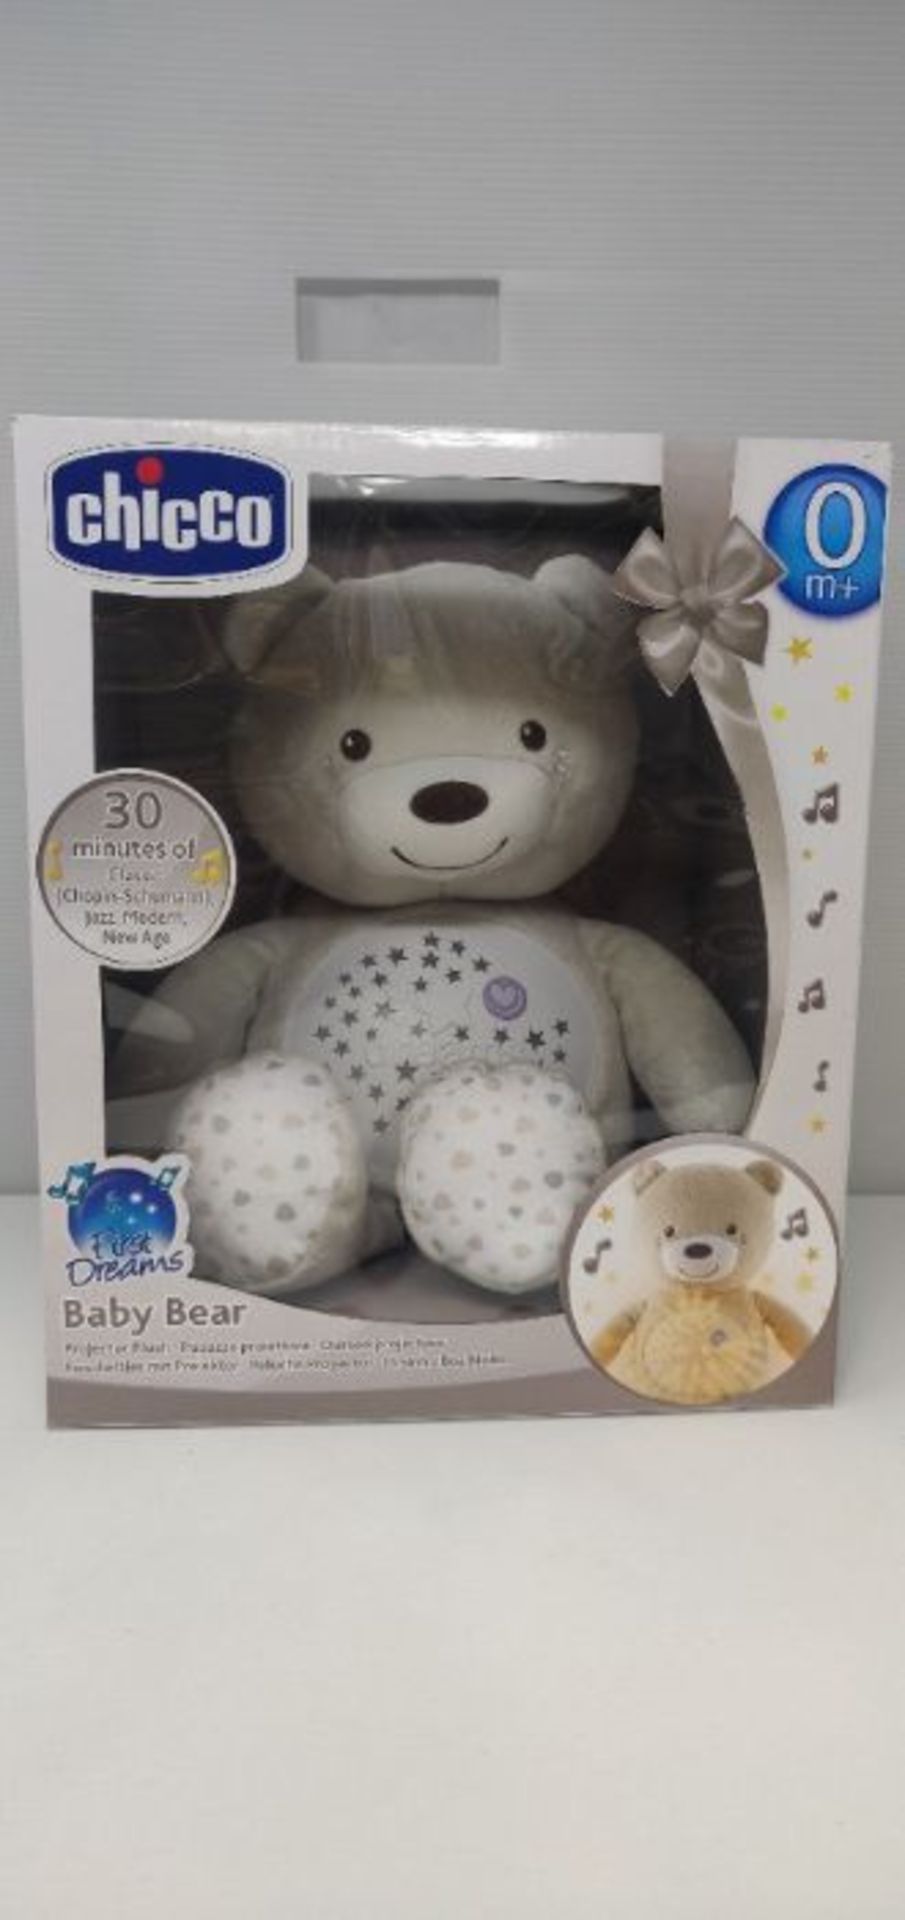 Chicco Baby Bear - Neutral - Image 2 of 3